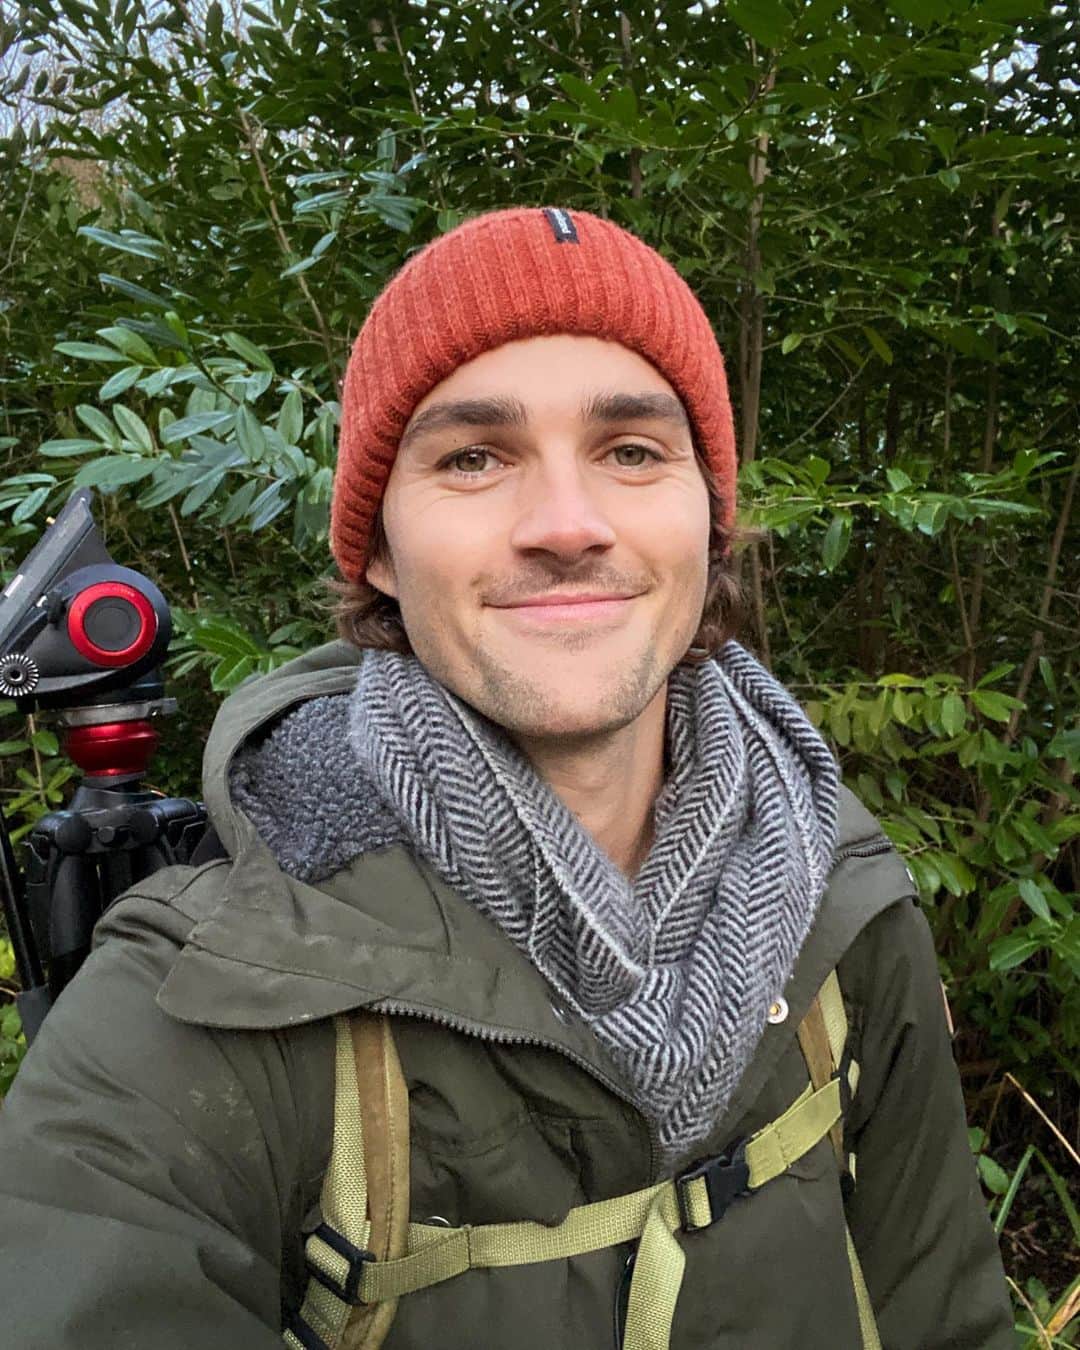 Jackson Harriesのインスタグラム：「I miss shooting. I miss being outdoors. I miss meeting people. I miss the spontaneity of life before COVID-19.  Whilst the world feels like it’s on pause, telling stories and tackling the climate crisis has never been more urgent.    I’m currently working on a project in the run up to COP26 that is more ambitious than anything I’ve ever done before. It all feels a bit overwhelming, especially against the backdrop of the global pandemic but I’m learning to trust in the process. This time requires us to dig deeper and be more creative than ever before.  This is just a message to anyone out there trying to push things forward and feeling the weight of the world. I feel you, we’re all in this together. 💚  How are you holding up, and what’s this time taught you? I’d love to know!」